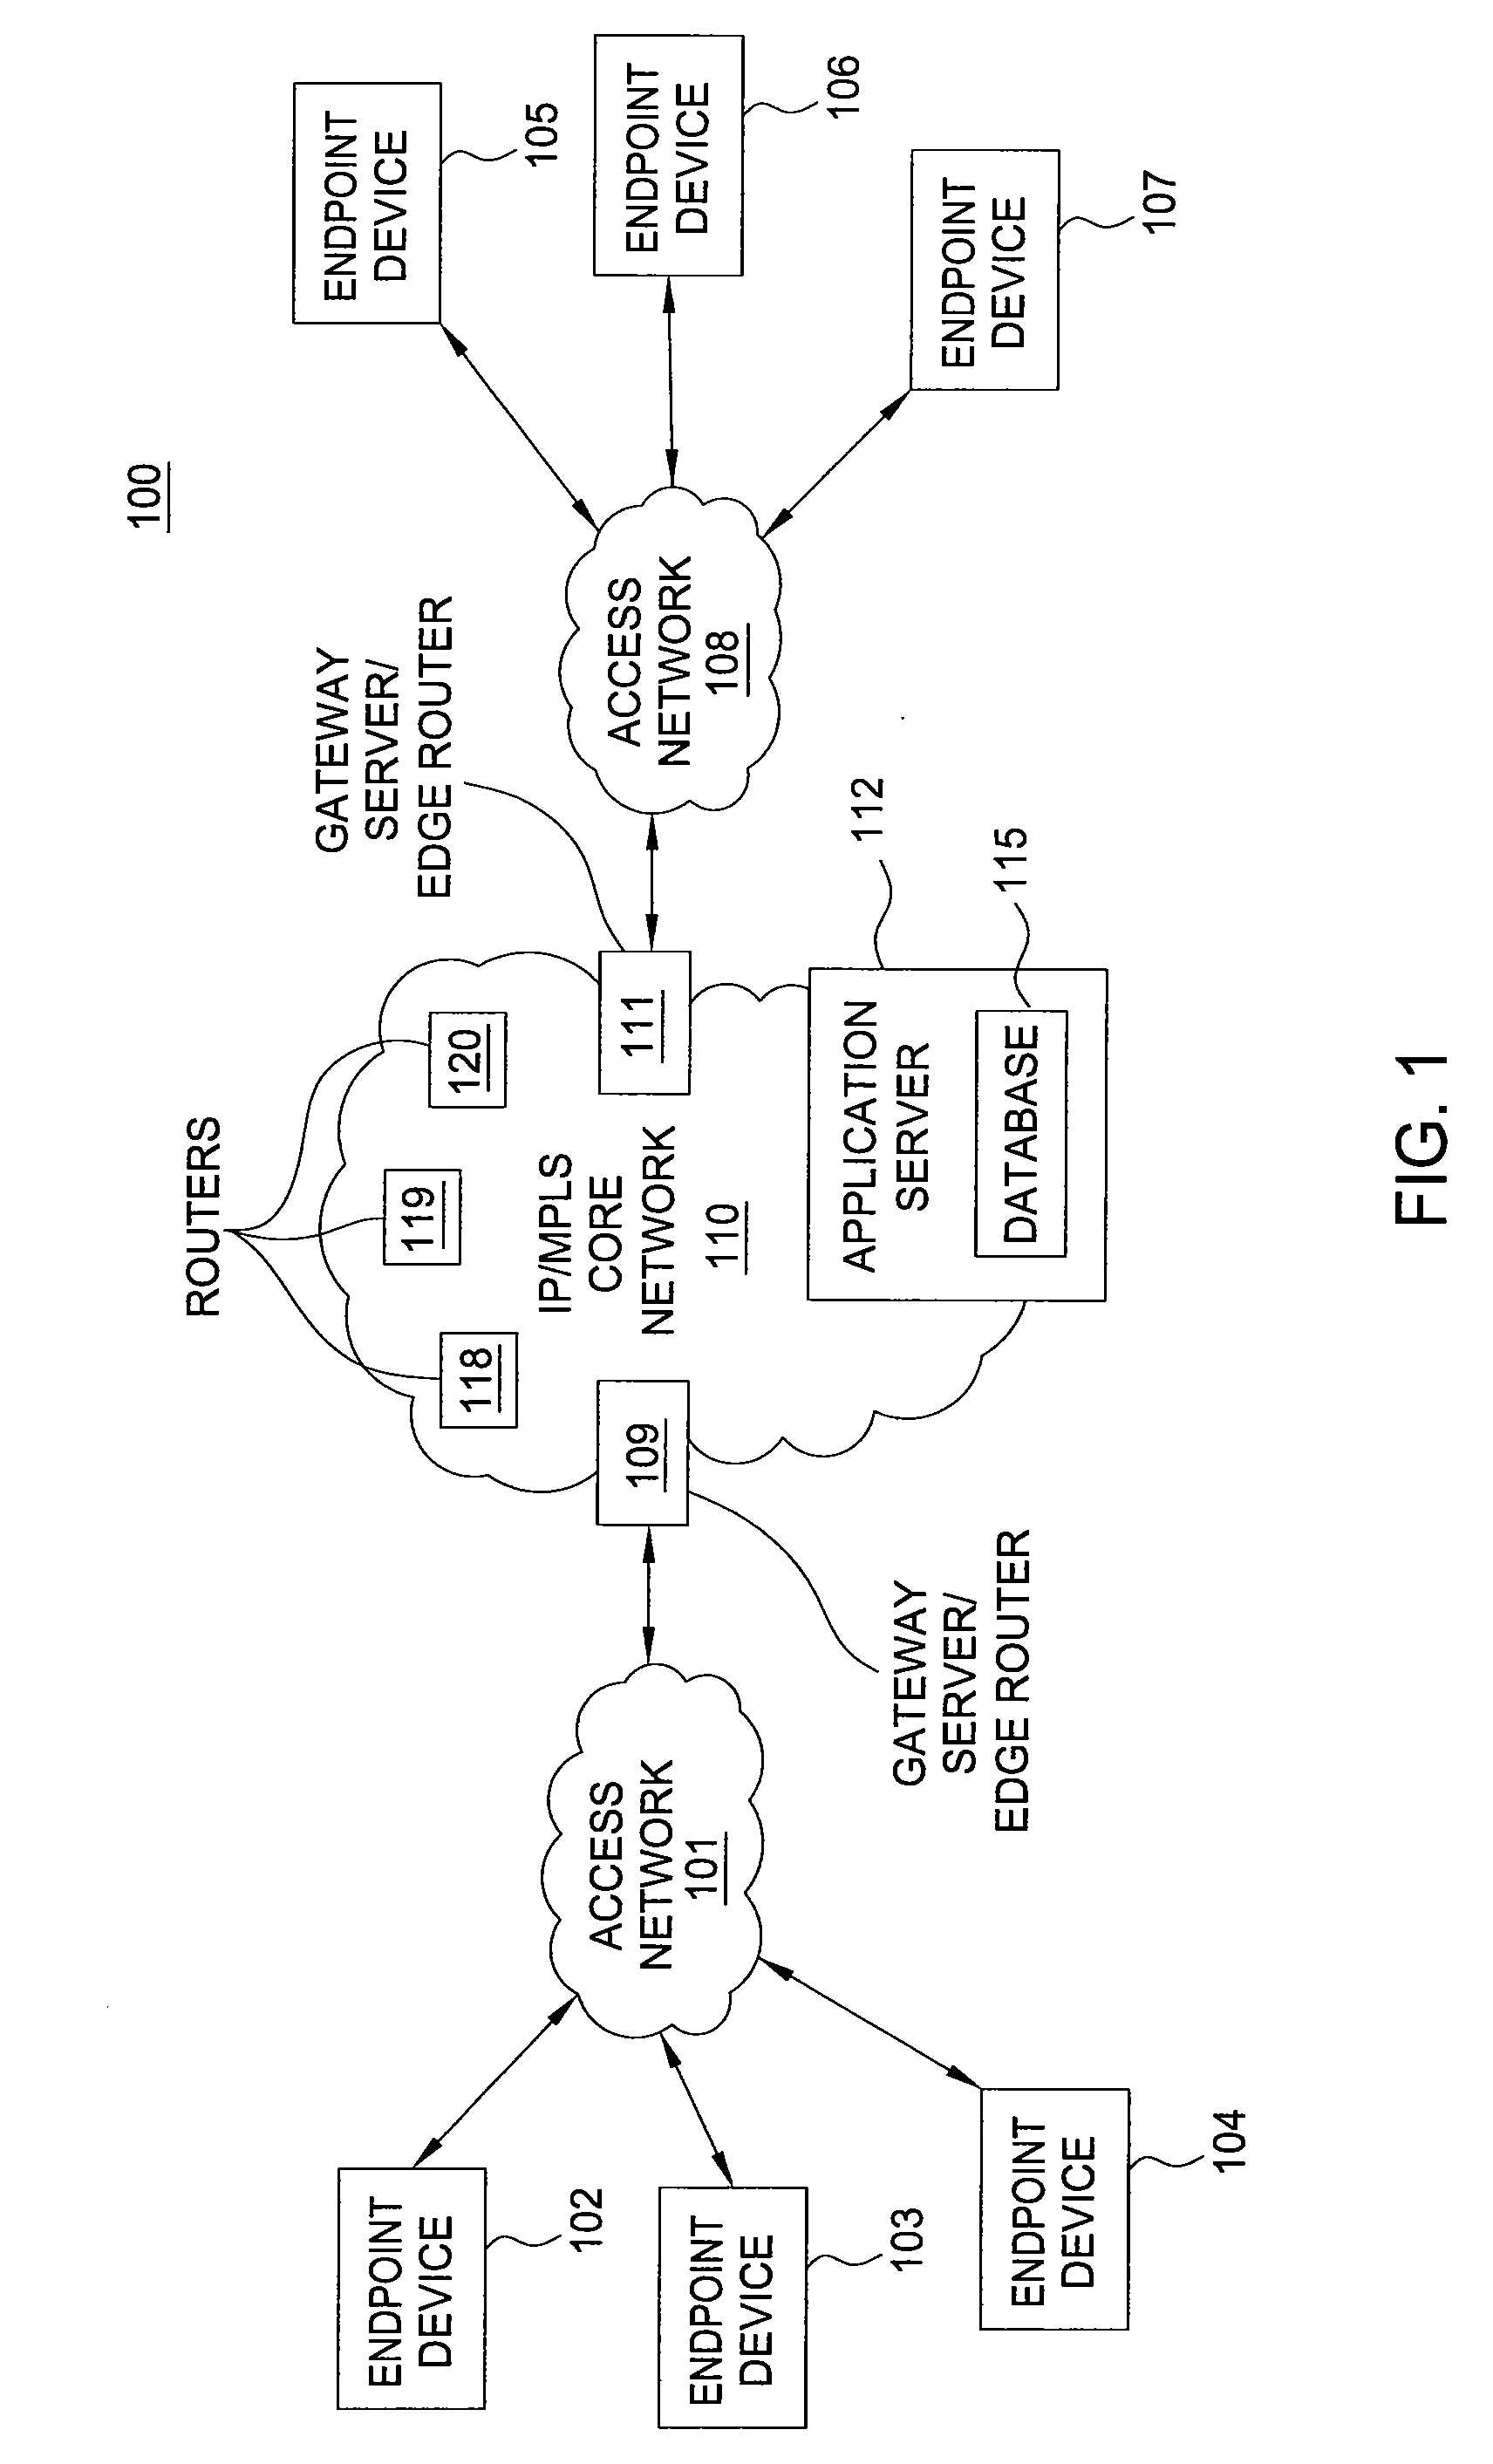 Method and apparatus for providing collaborative viewing of a media stream